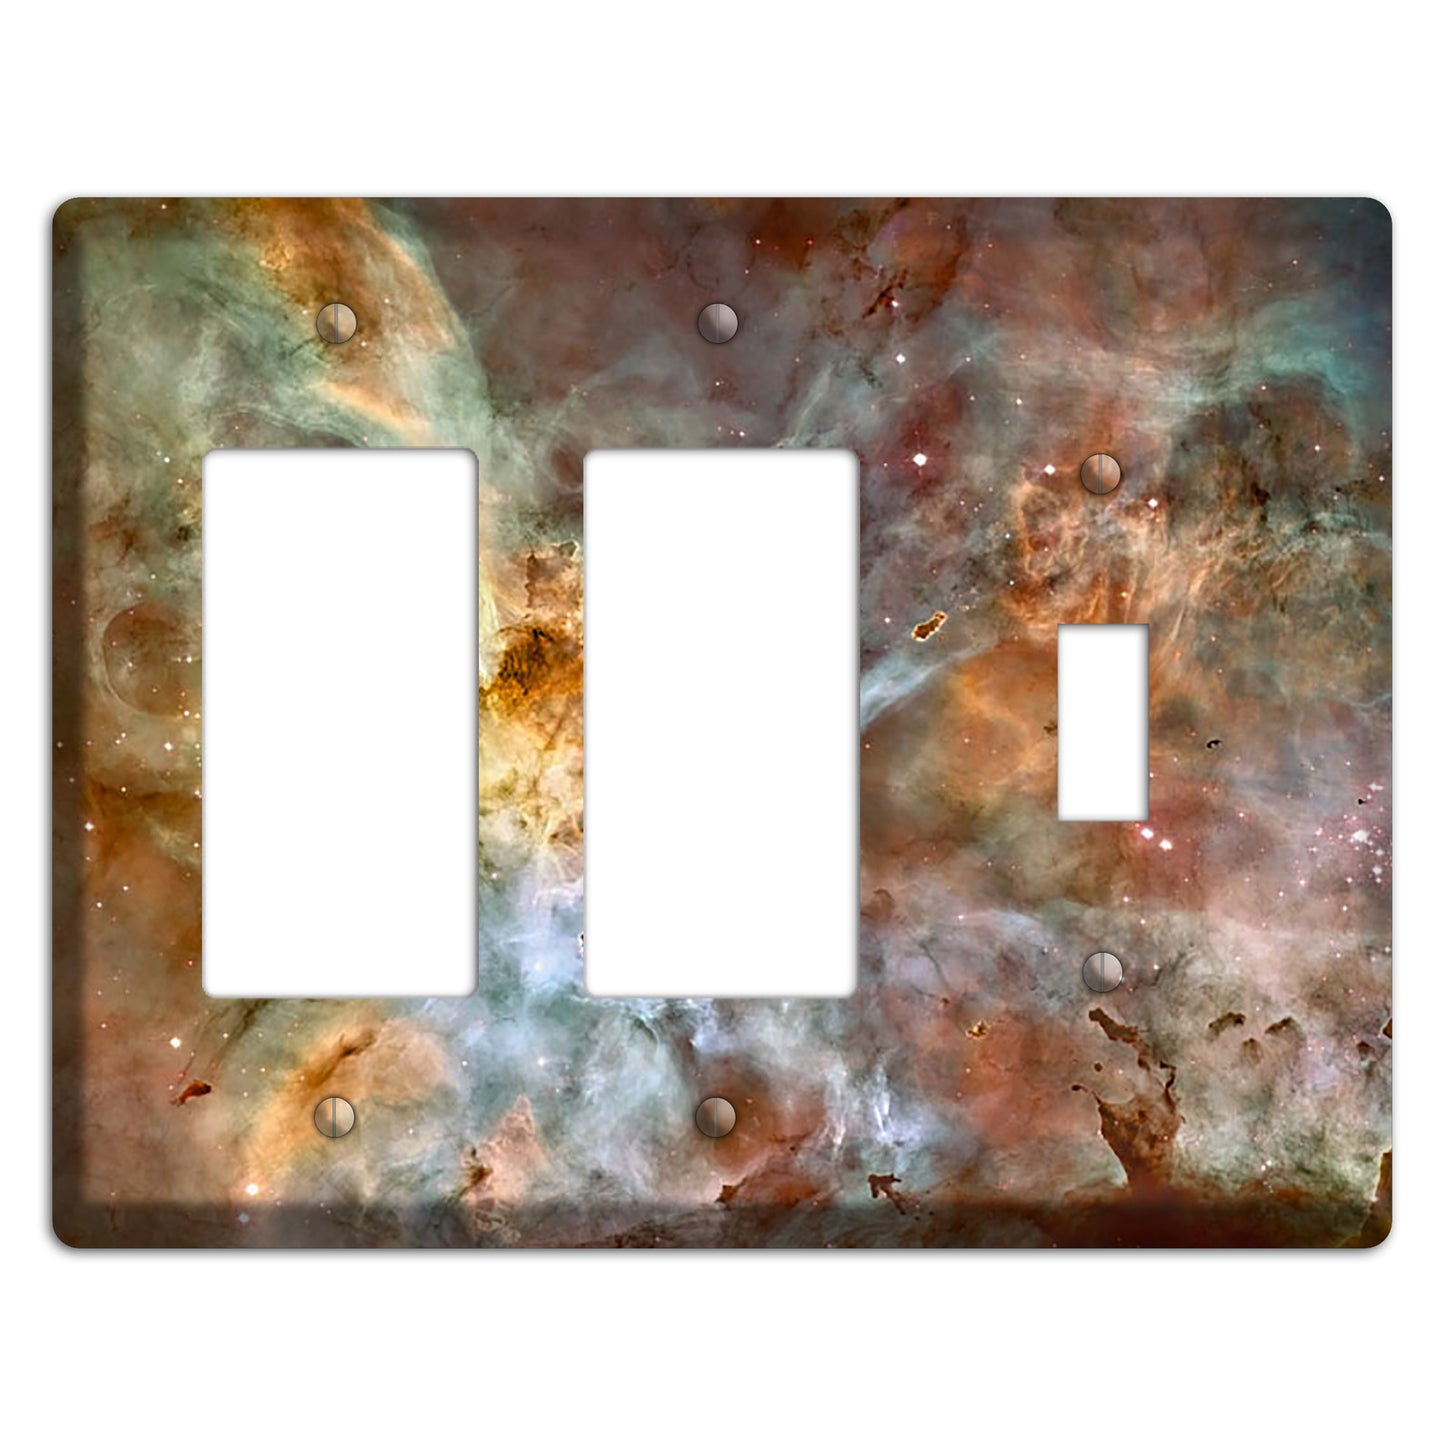 Star birth in the extreme 2 Rocker / Toggle Wallplate